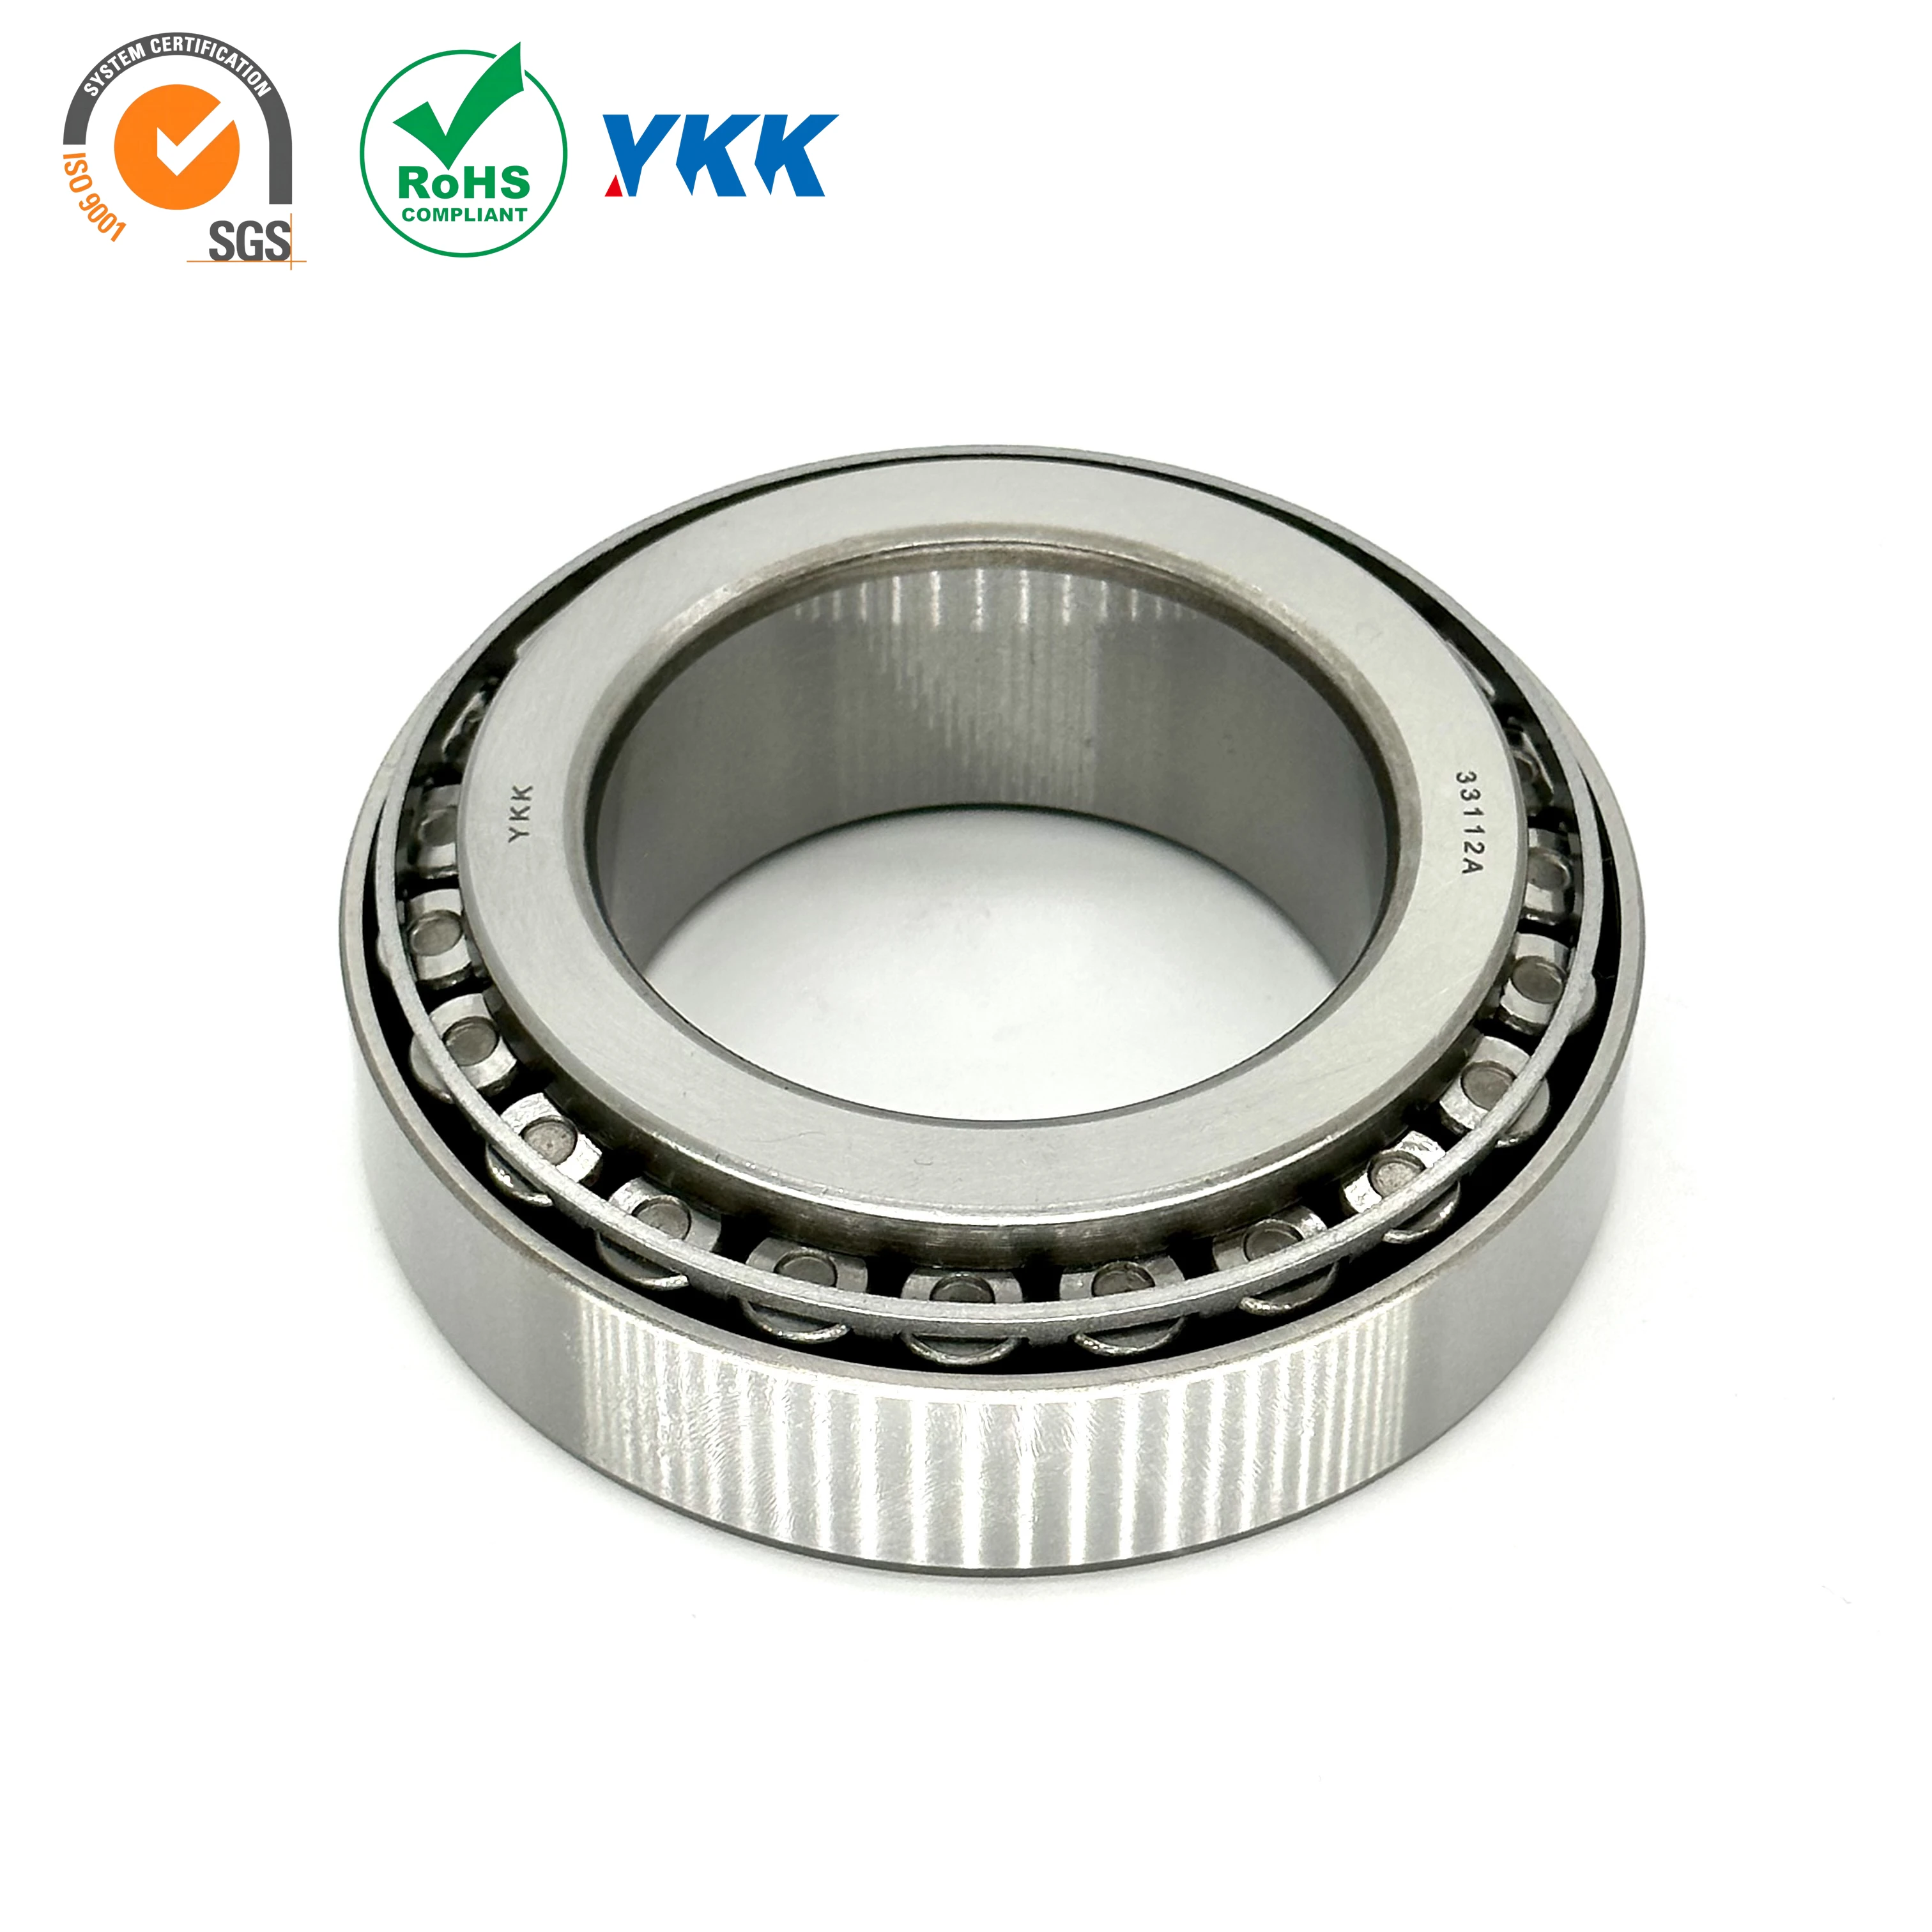 Ykk Seiko Bearing Hr70kbe042+l Hr70kbe42+l Hr70kbe52x+l Hr70kbe43+l  Hr75kbe42+l Hr75kbe52x+l Tapered Roller Bearing - Buy Timken 48685 Tapered  Roller Bearing,Ceramic Tapered Roller Bearings,Koyo 32005jr Taper Roller  Bearing Trb Product on 